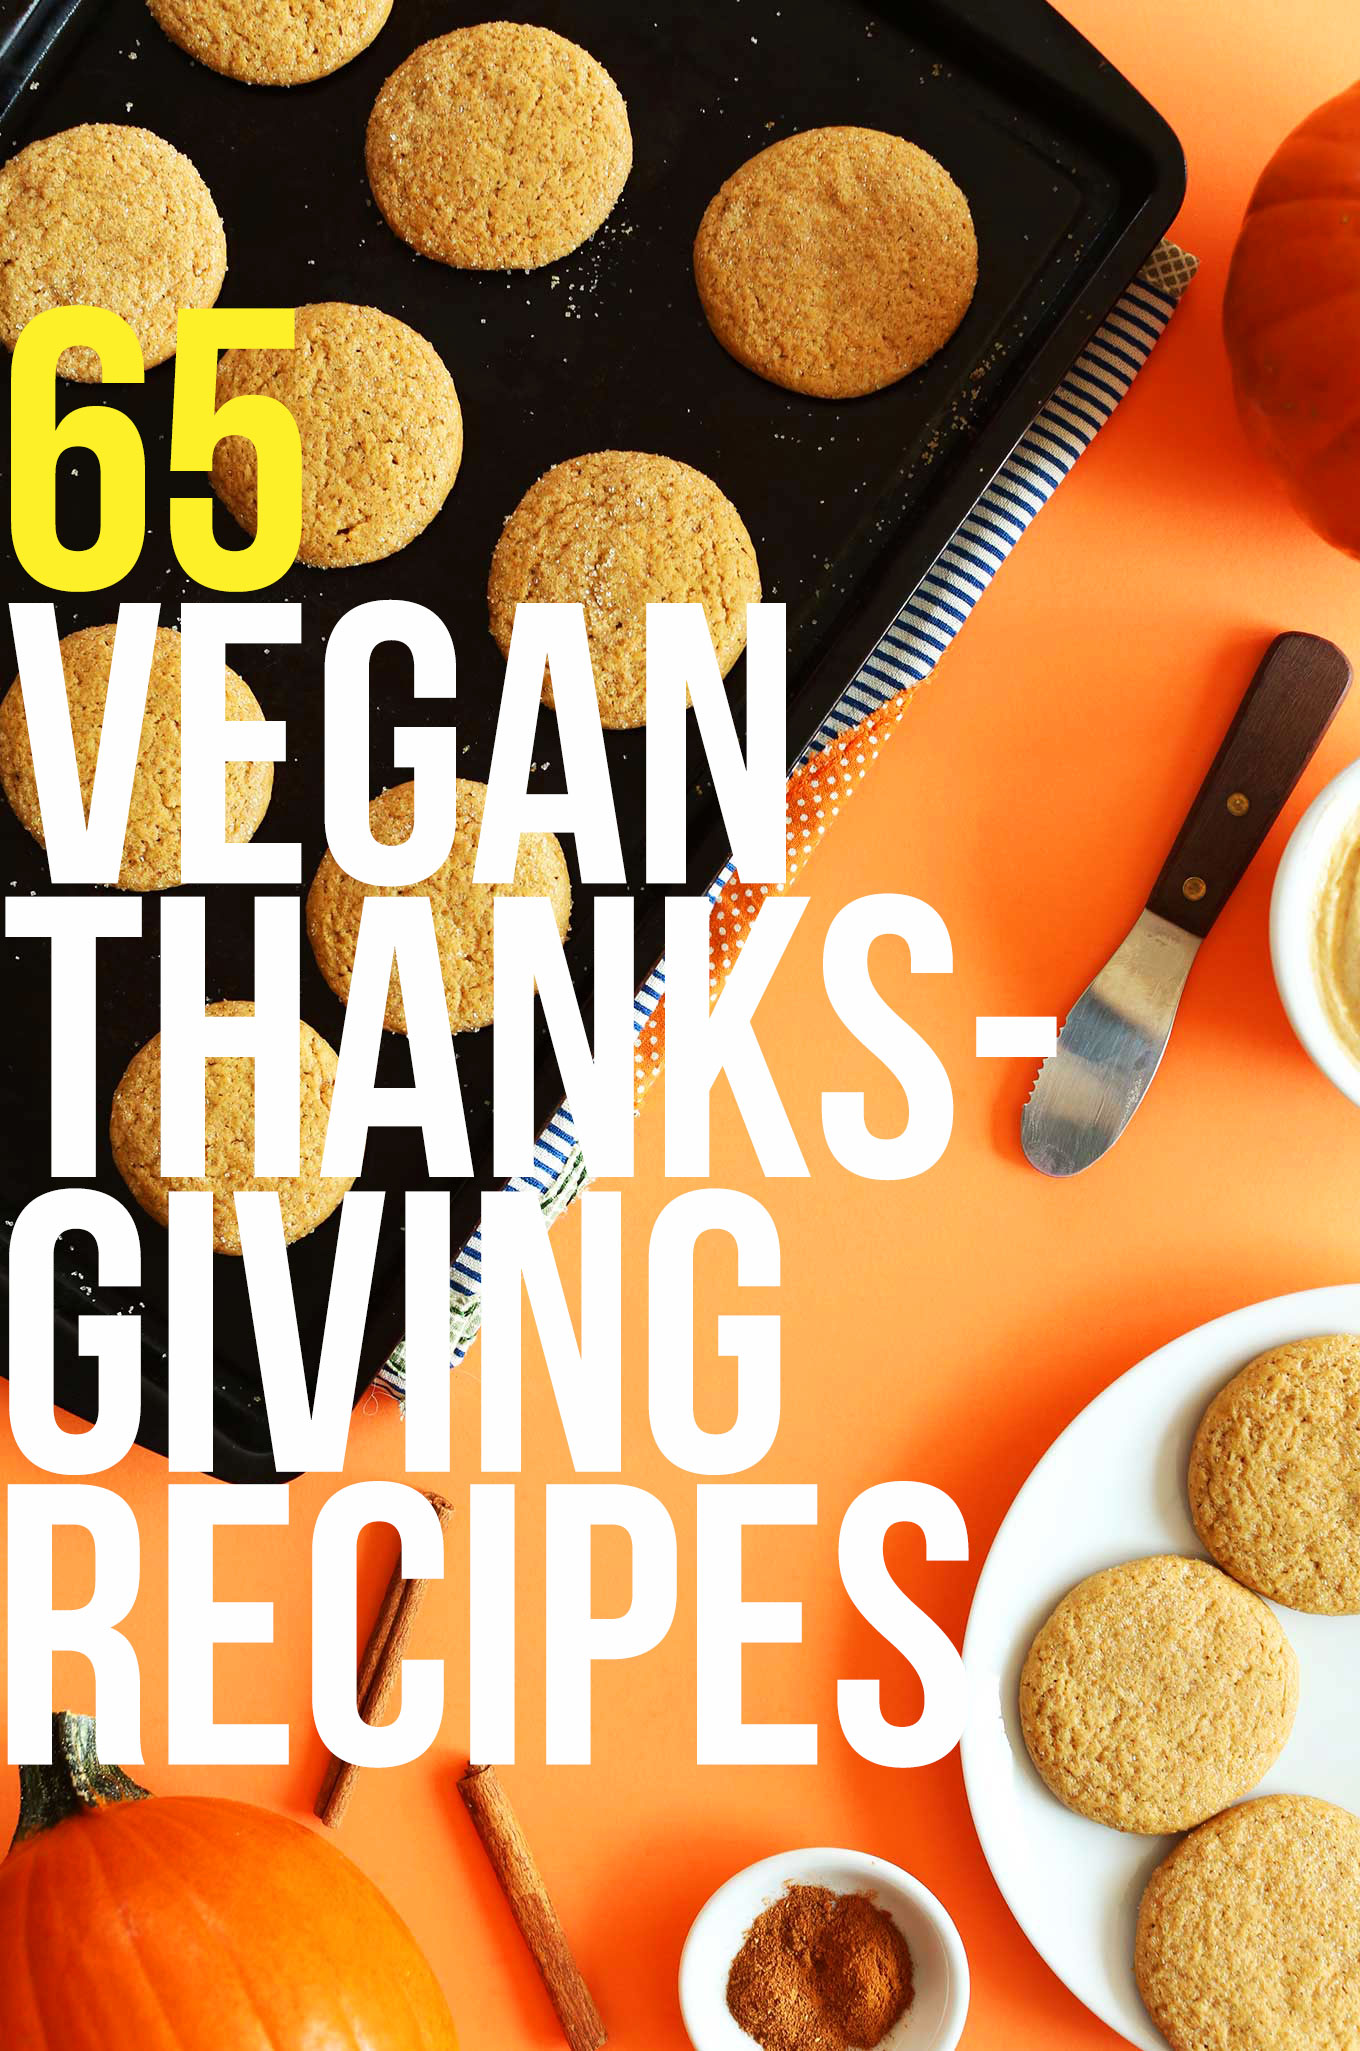 Cookies overlaid with text saying "65 Vegan Thanksgiving Recipes"